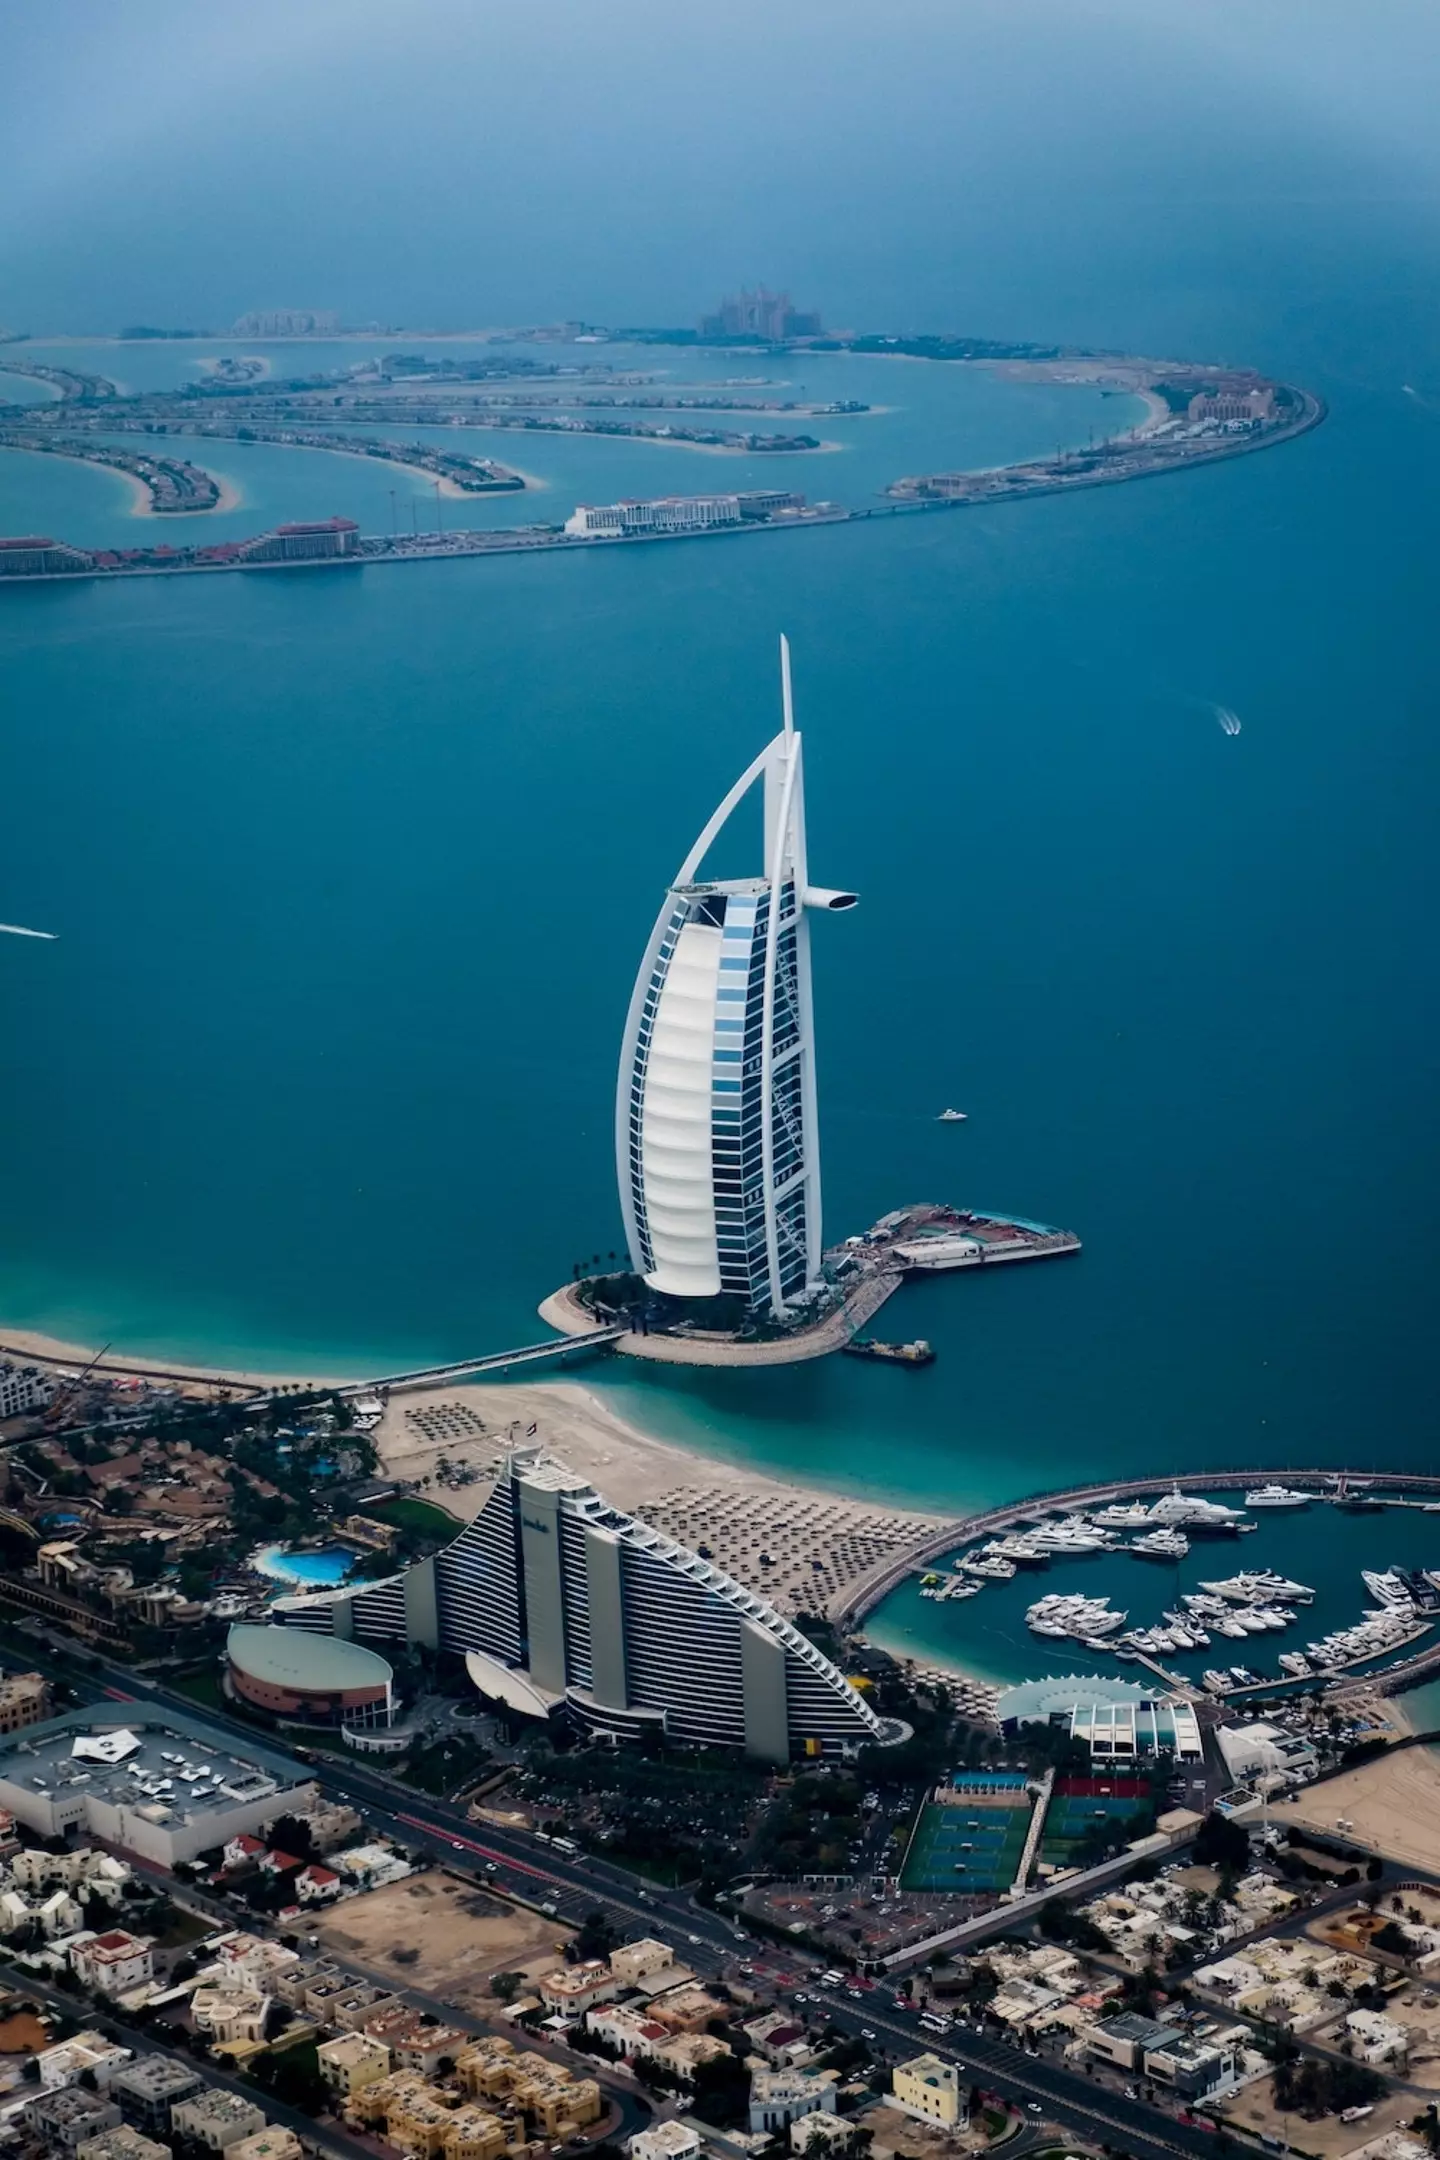 Dubai is the fourth most visited city in the world.